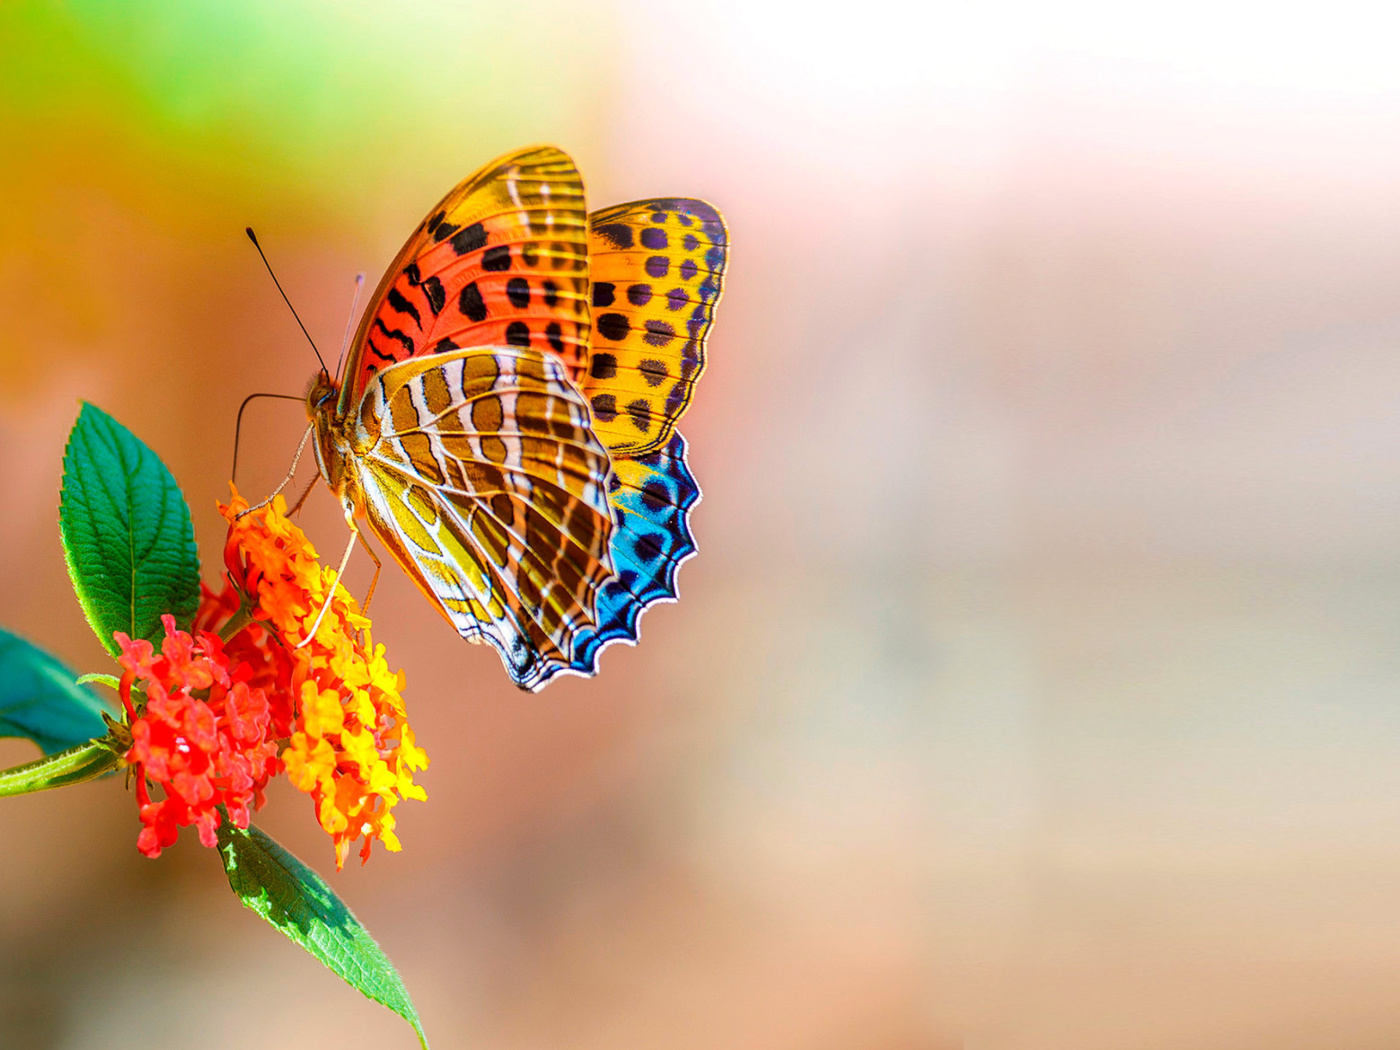 Colorful Animated Butterfly wallpaper 1400x1050